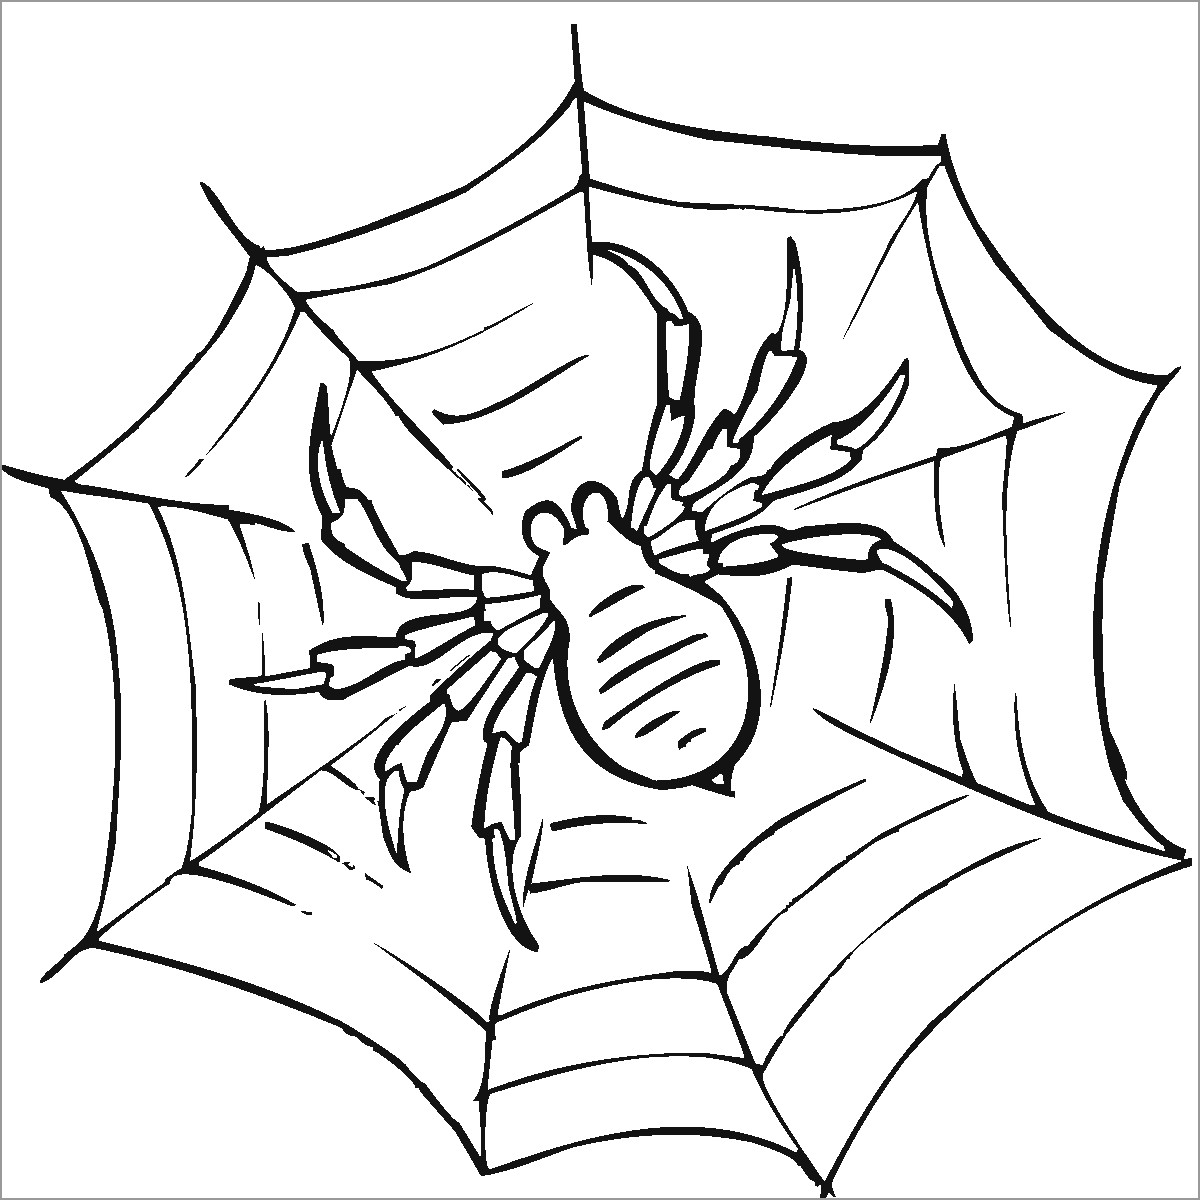 Tarantula Coloring Page for Kids